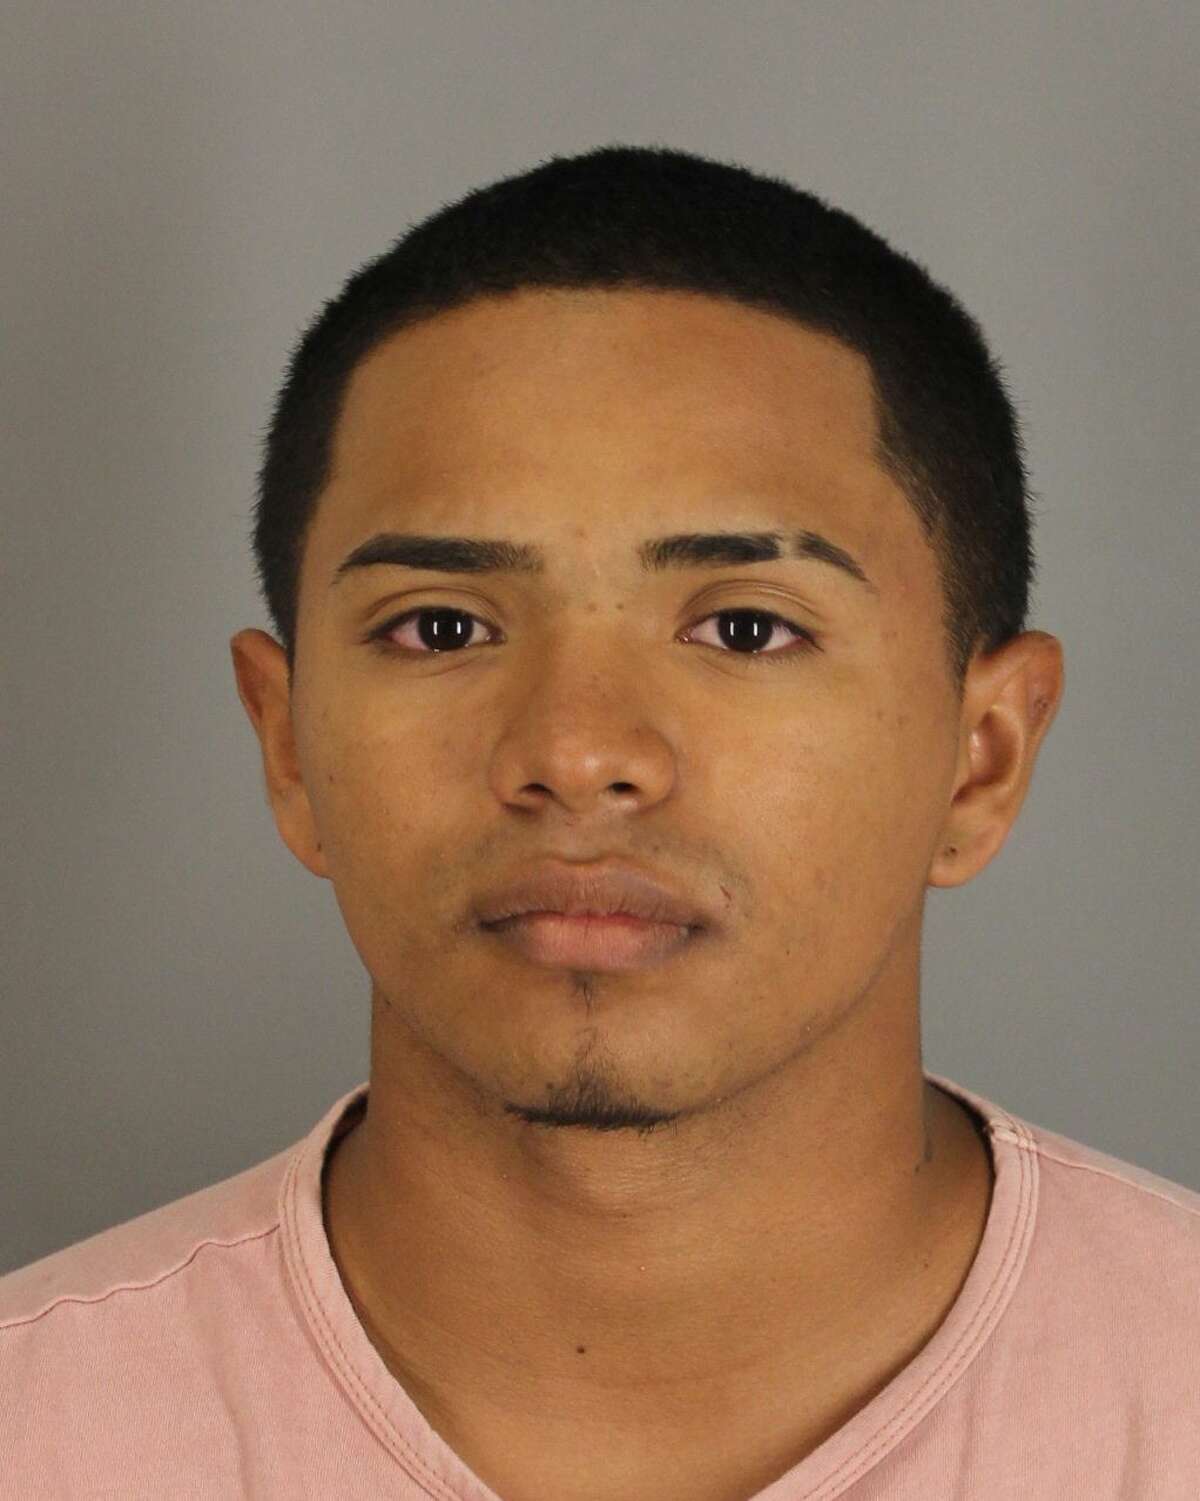 German Adalid Borja, 19, was booked into the Jefferson County Correctional Facility on Friday for burglary of a habitation.